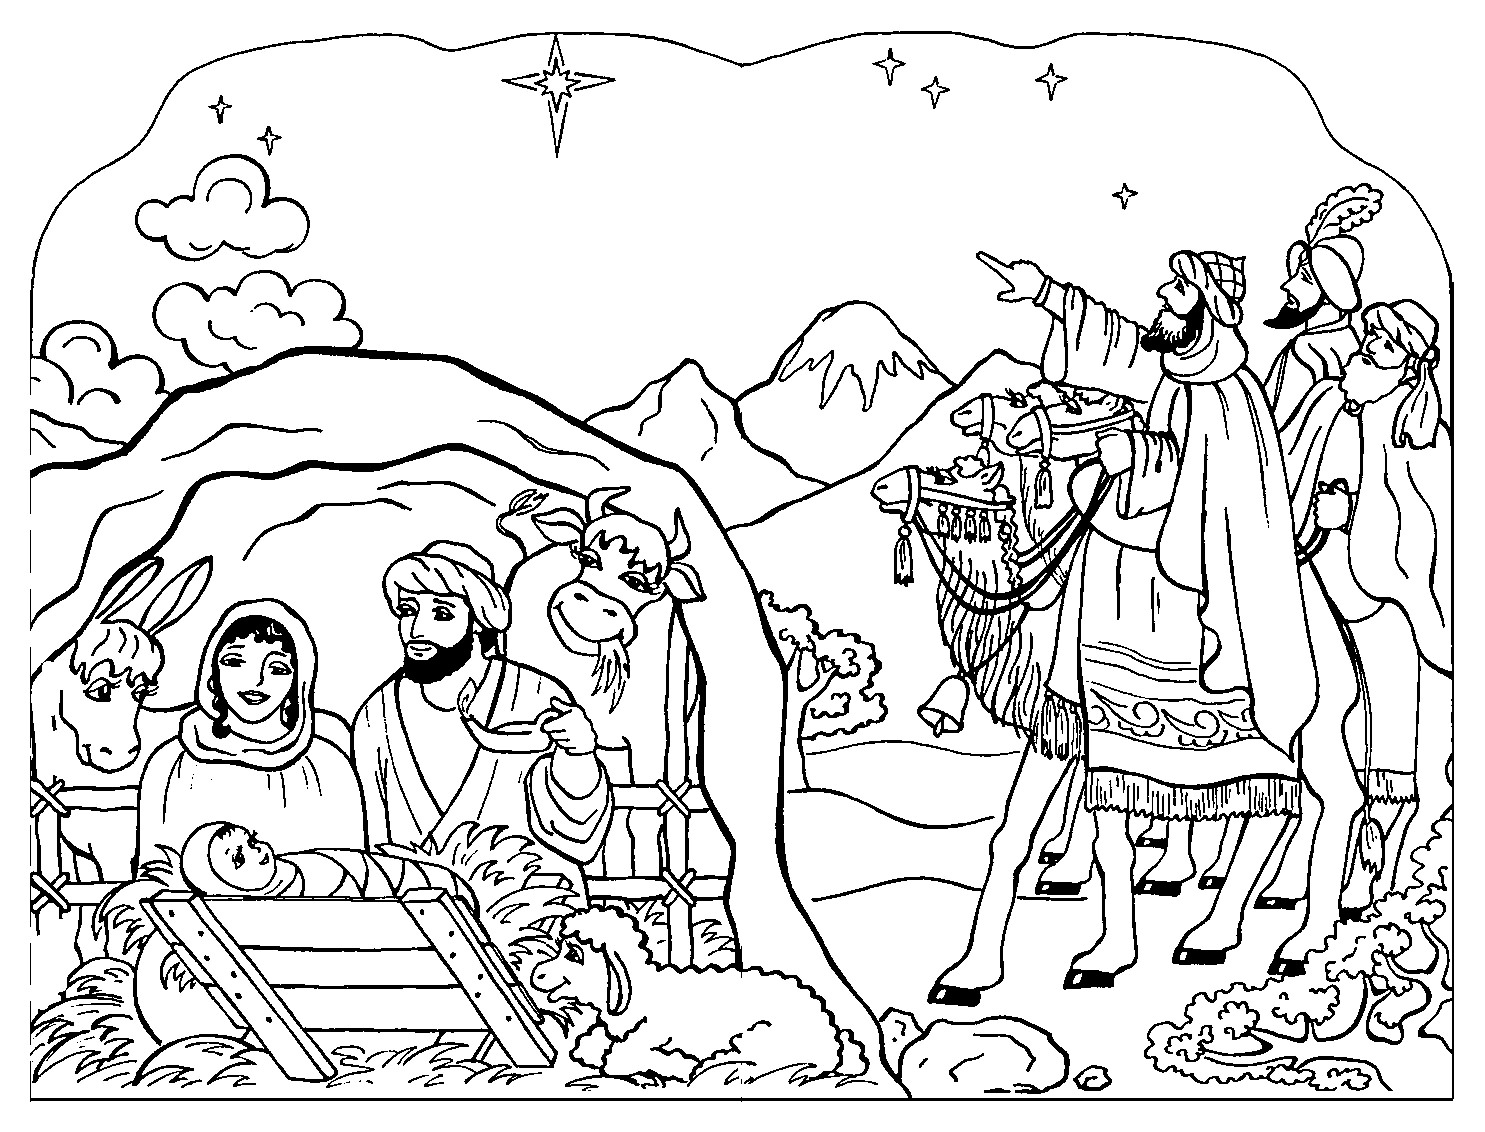 Three Kings Day Coloring Pages At GetColorings Free Printable Colorings Pages To Print And